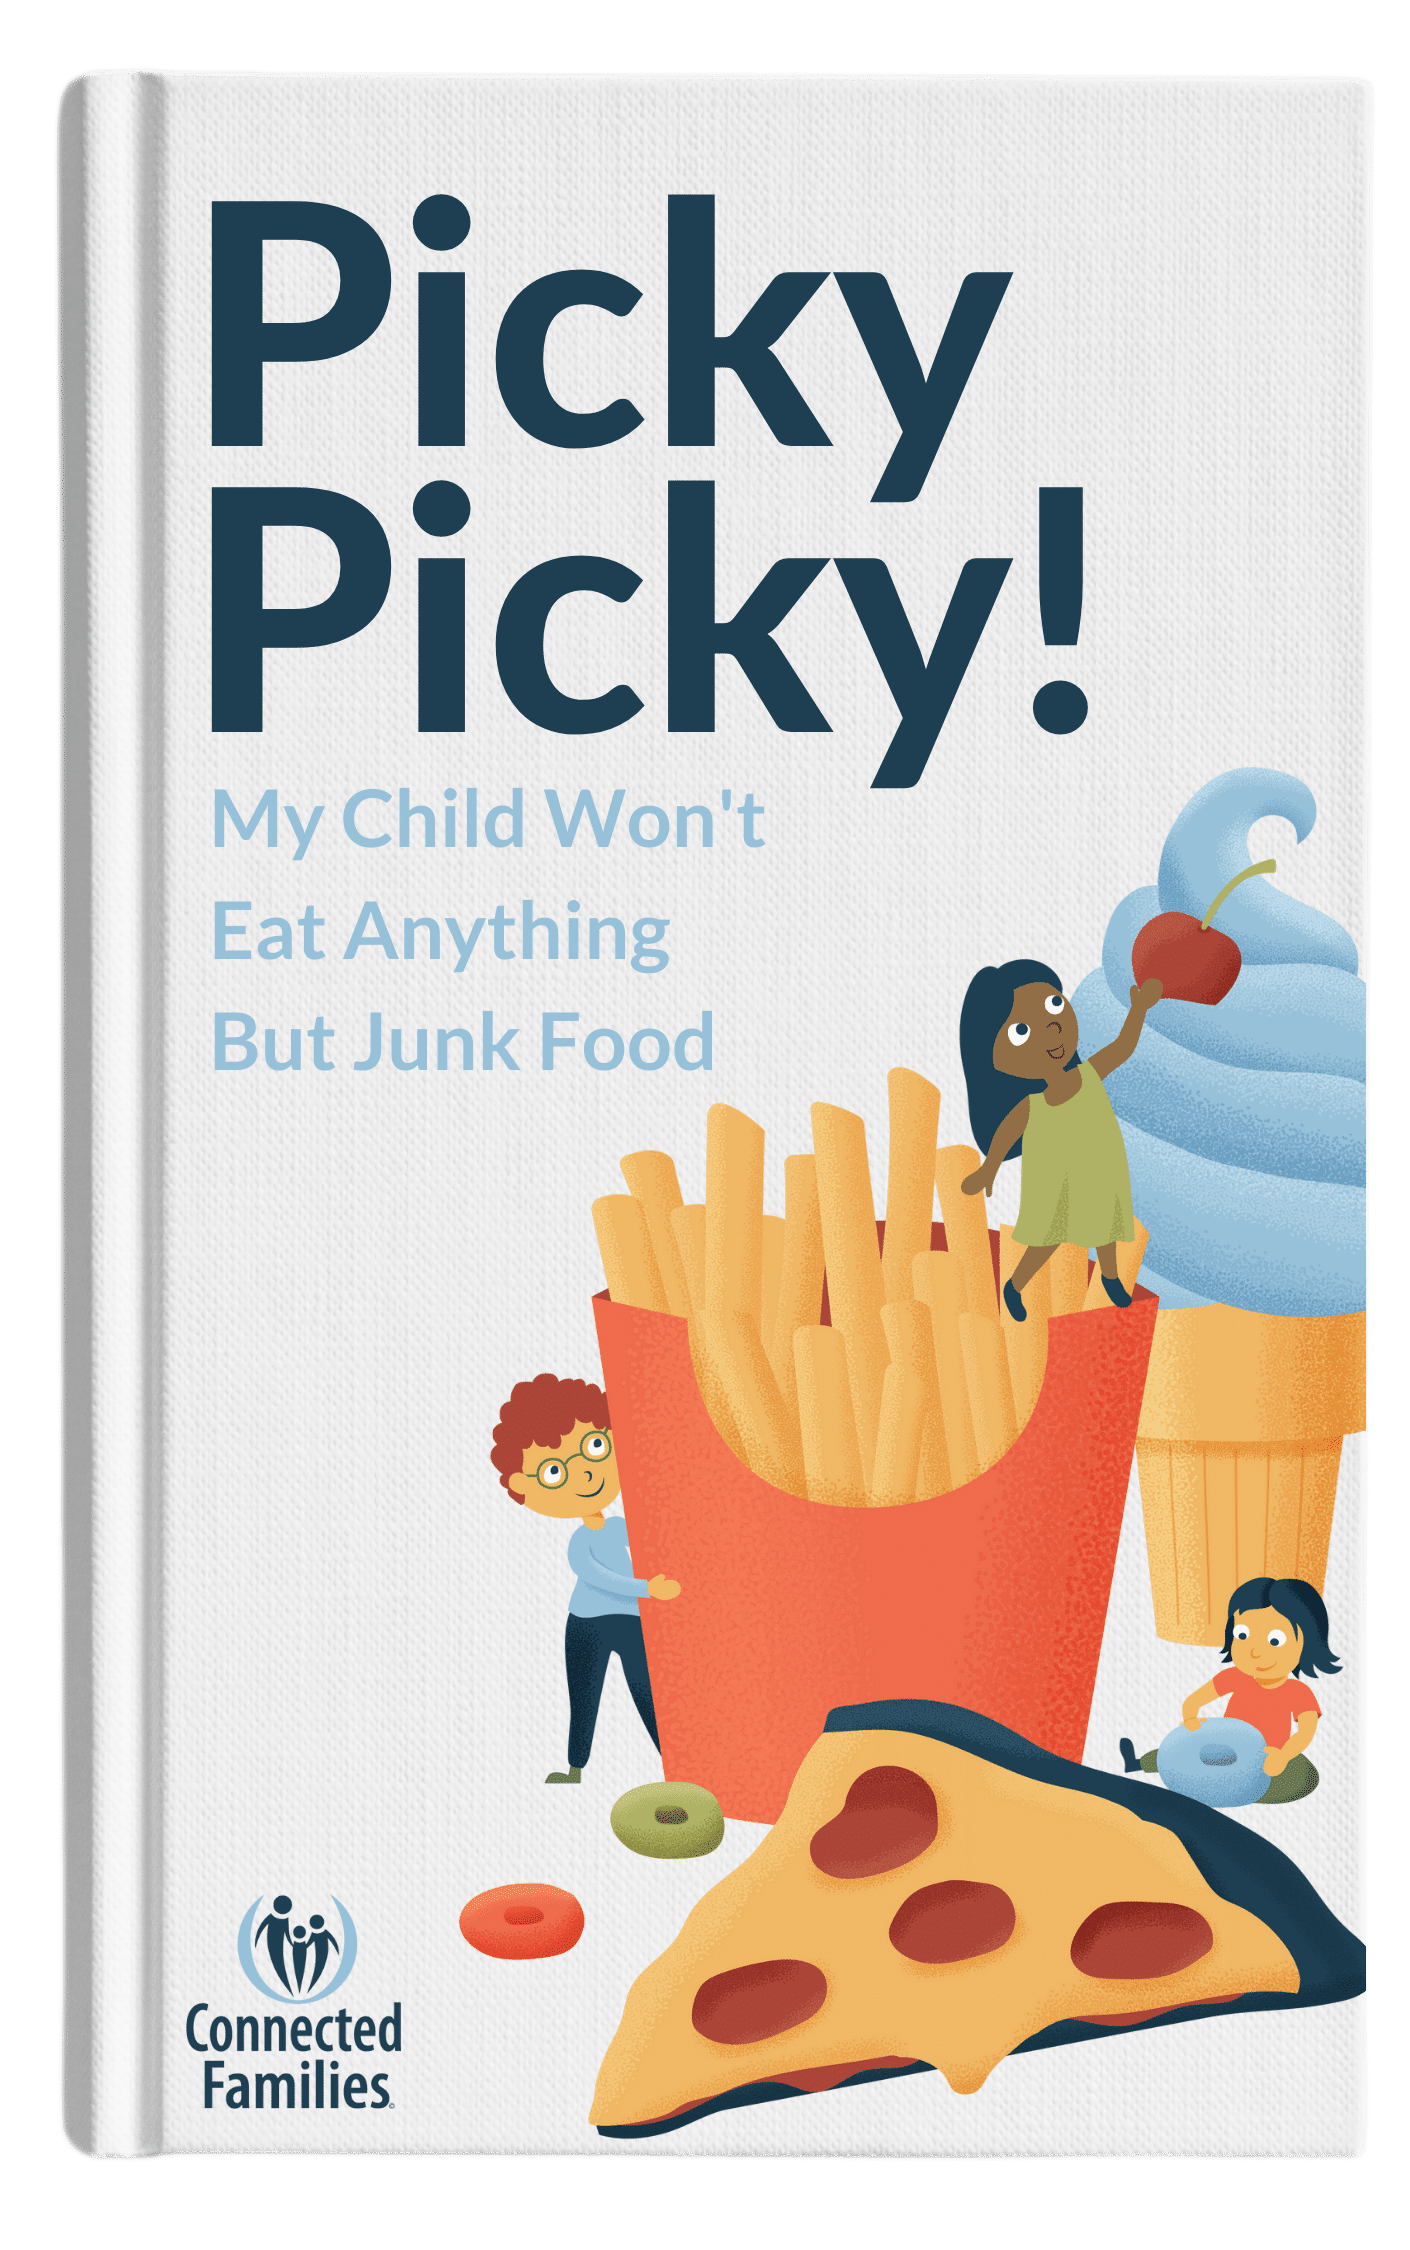 Picky Picky! My Child Won't Eat Anything But Junk Food (book cover)